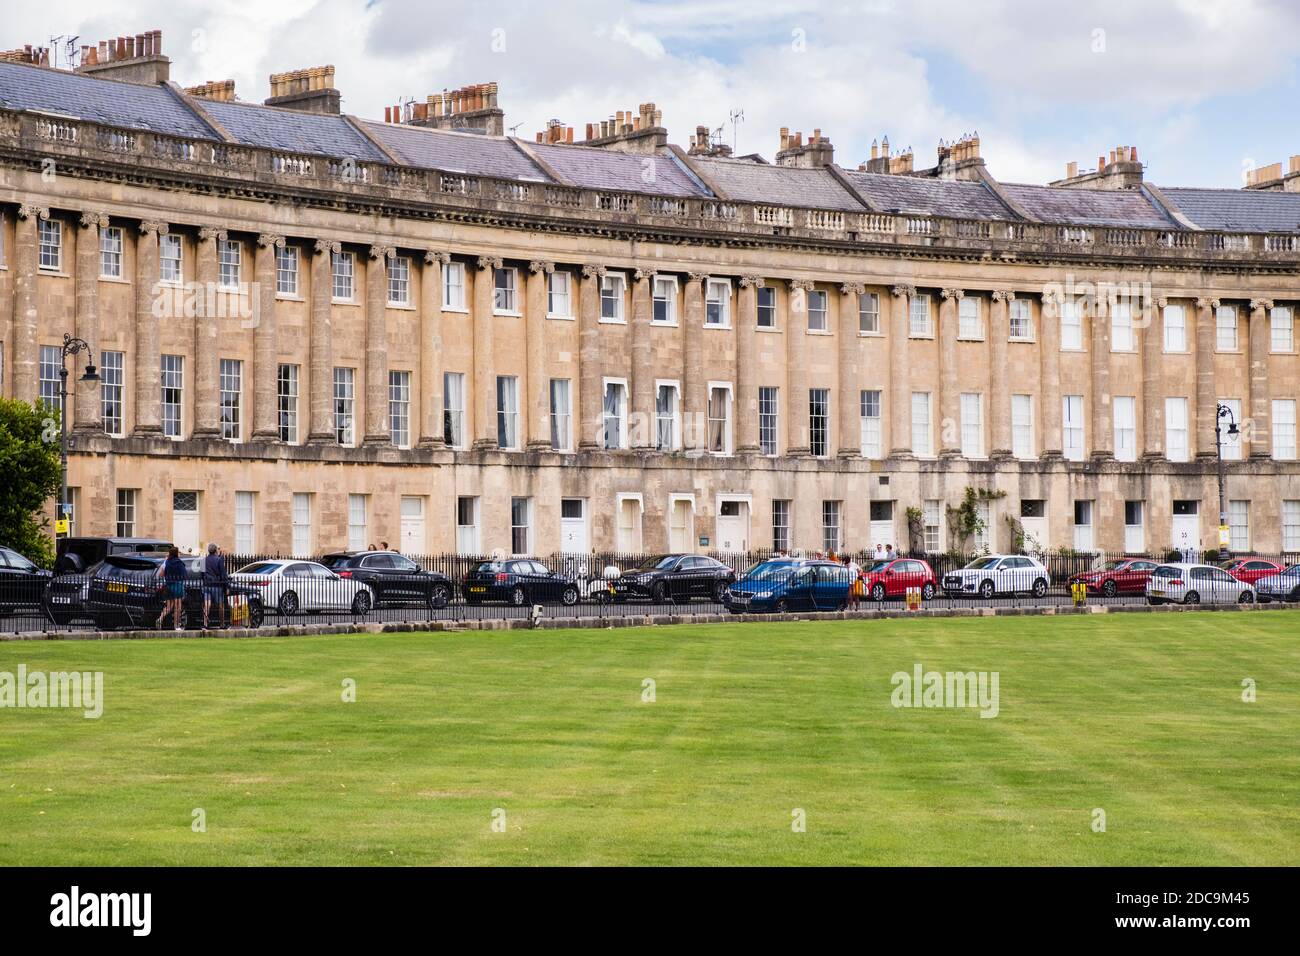 The Royal Crescent, Bath, Somerset, Angleterre, GB, Royaume-Uni Banque D'Images